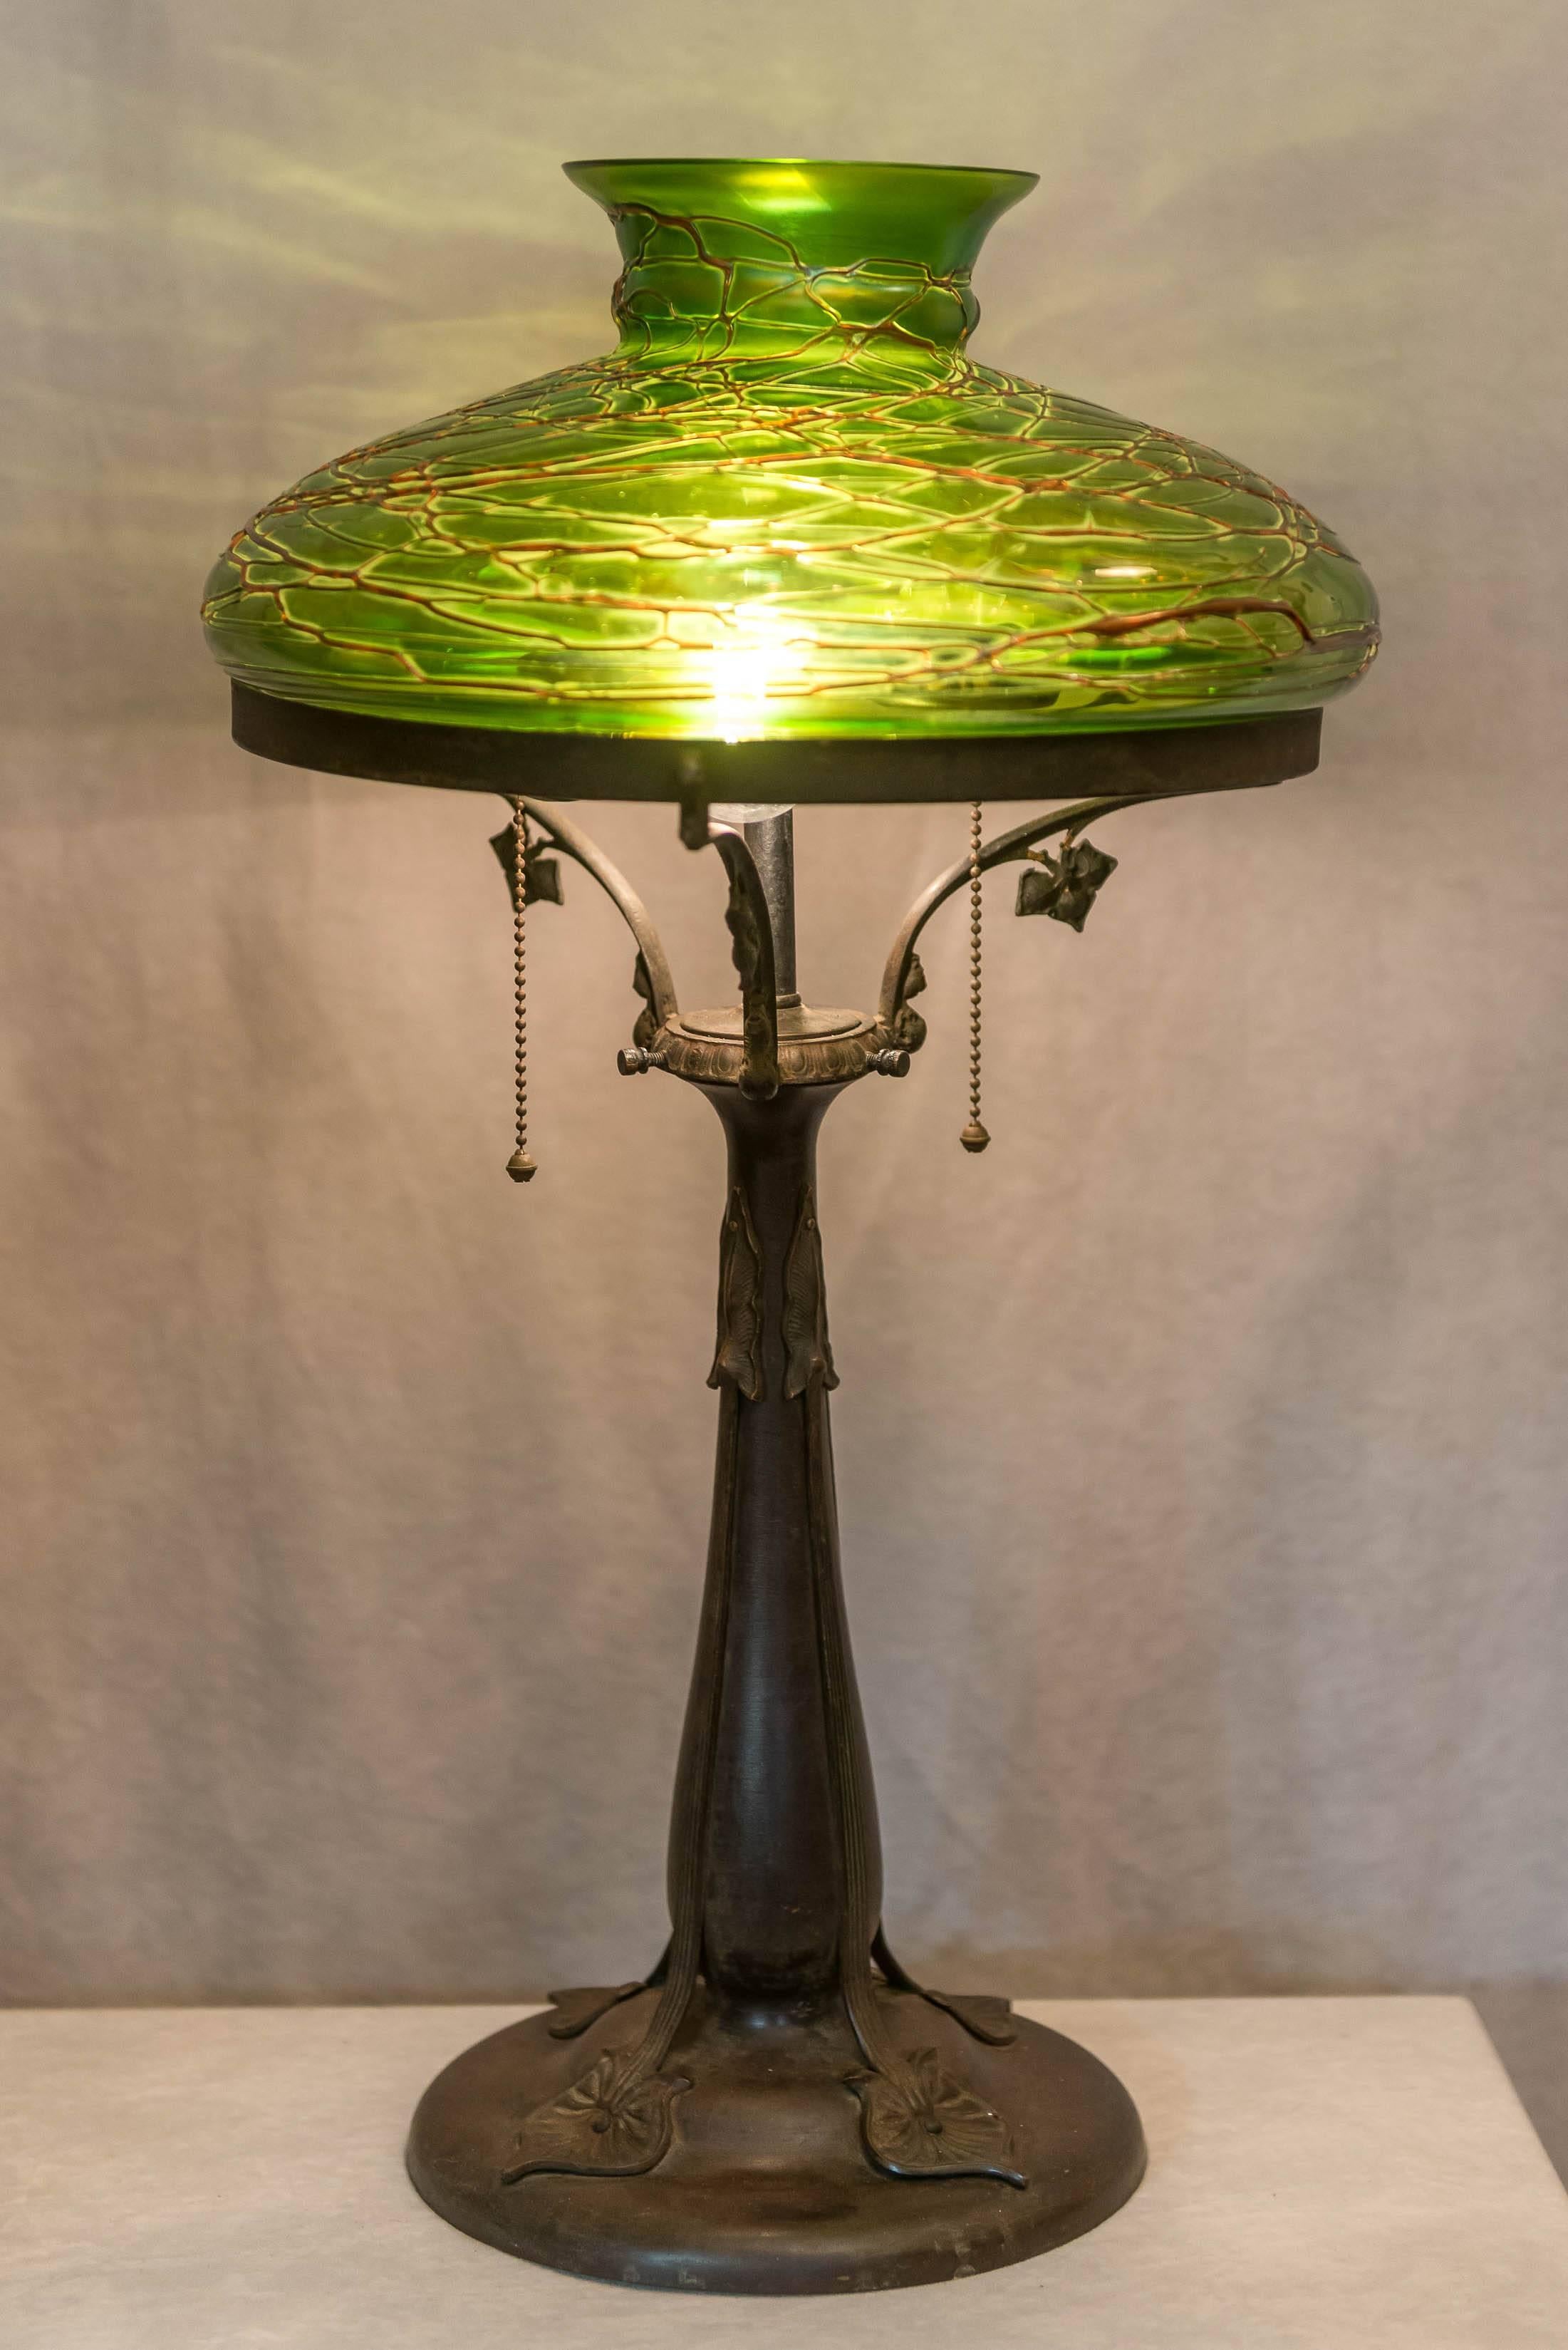 Hand-Crafted Austrian Art Nouveau Table Lamp with Handblown Shade